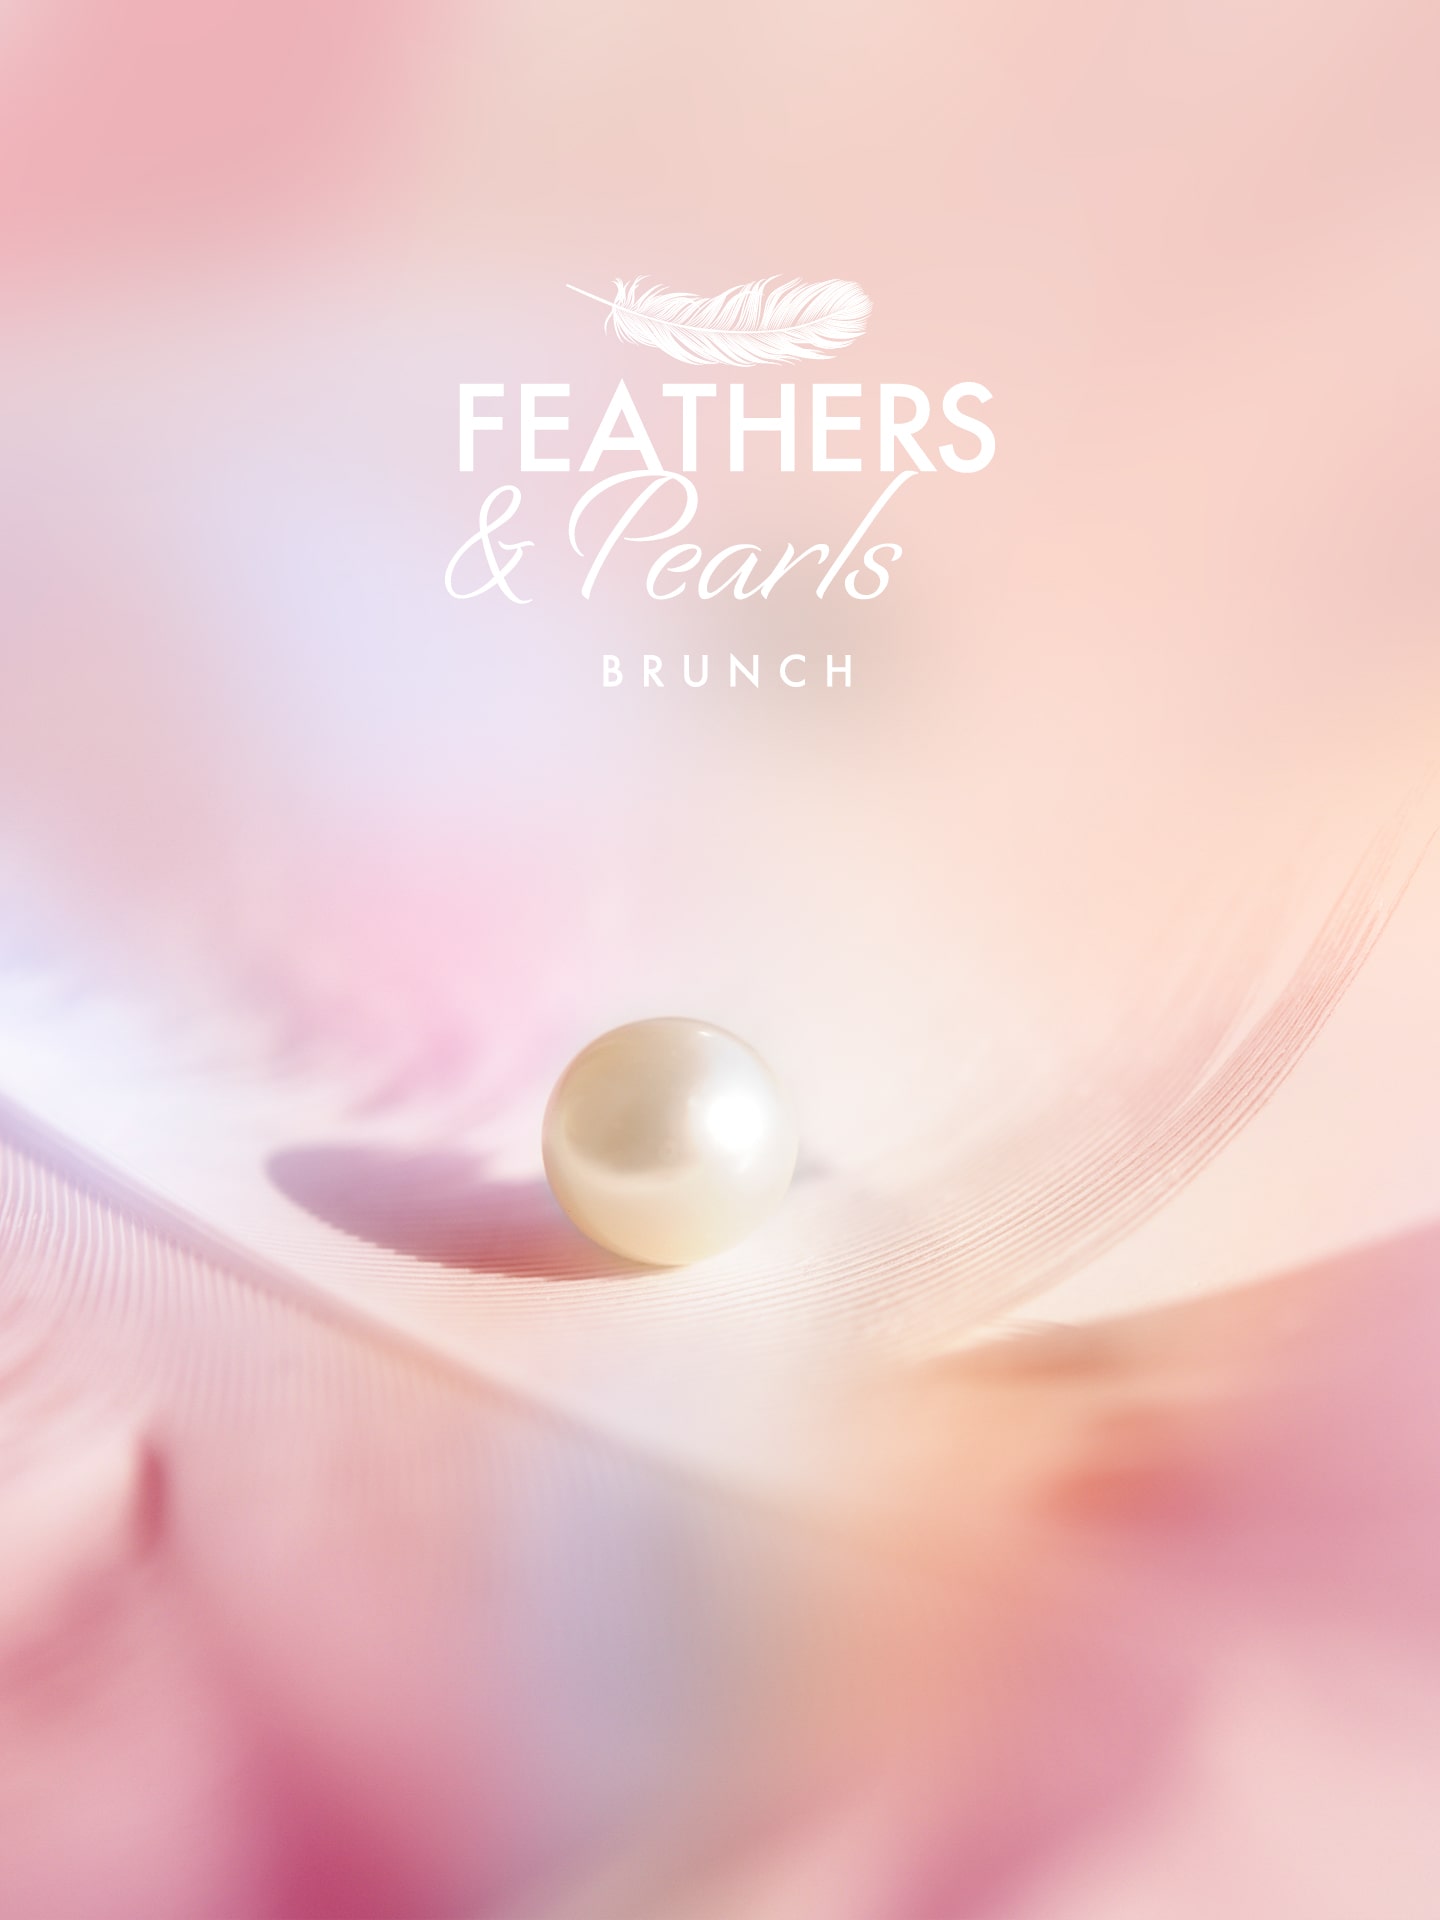 http://Feathers%20&%20Pearls